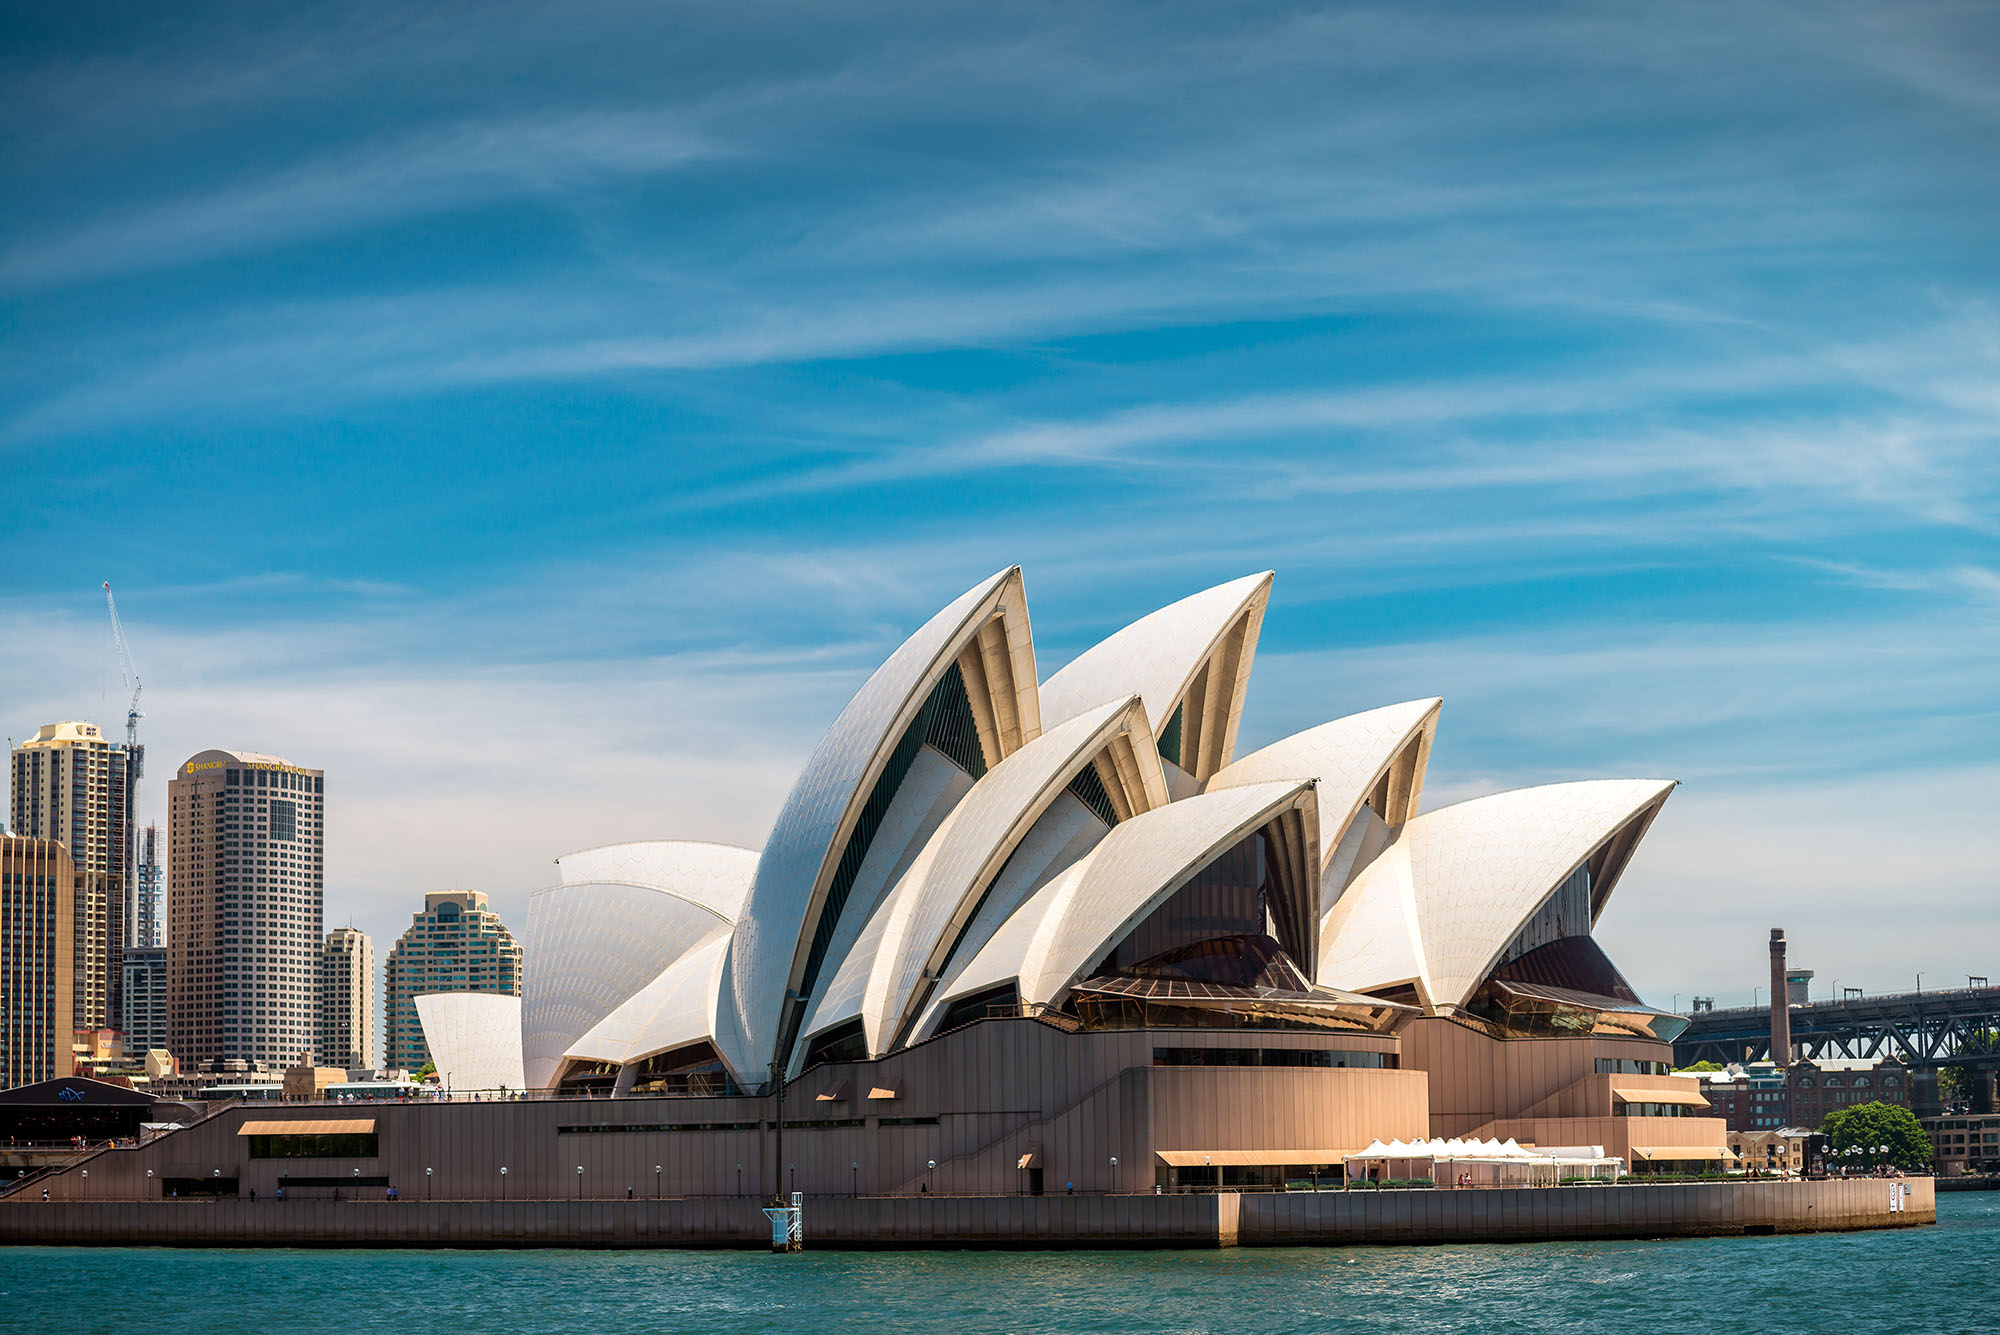 See a Live Performance at the Sydney Opera House, Australia